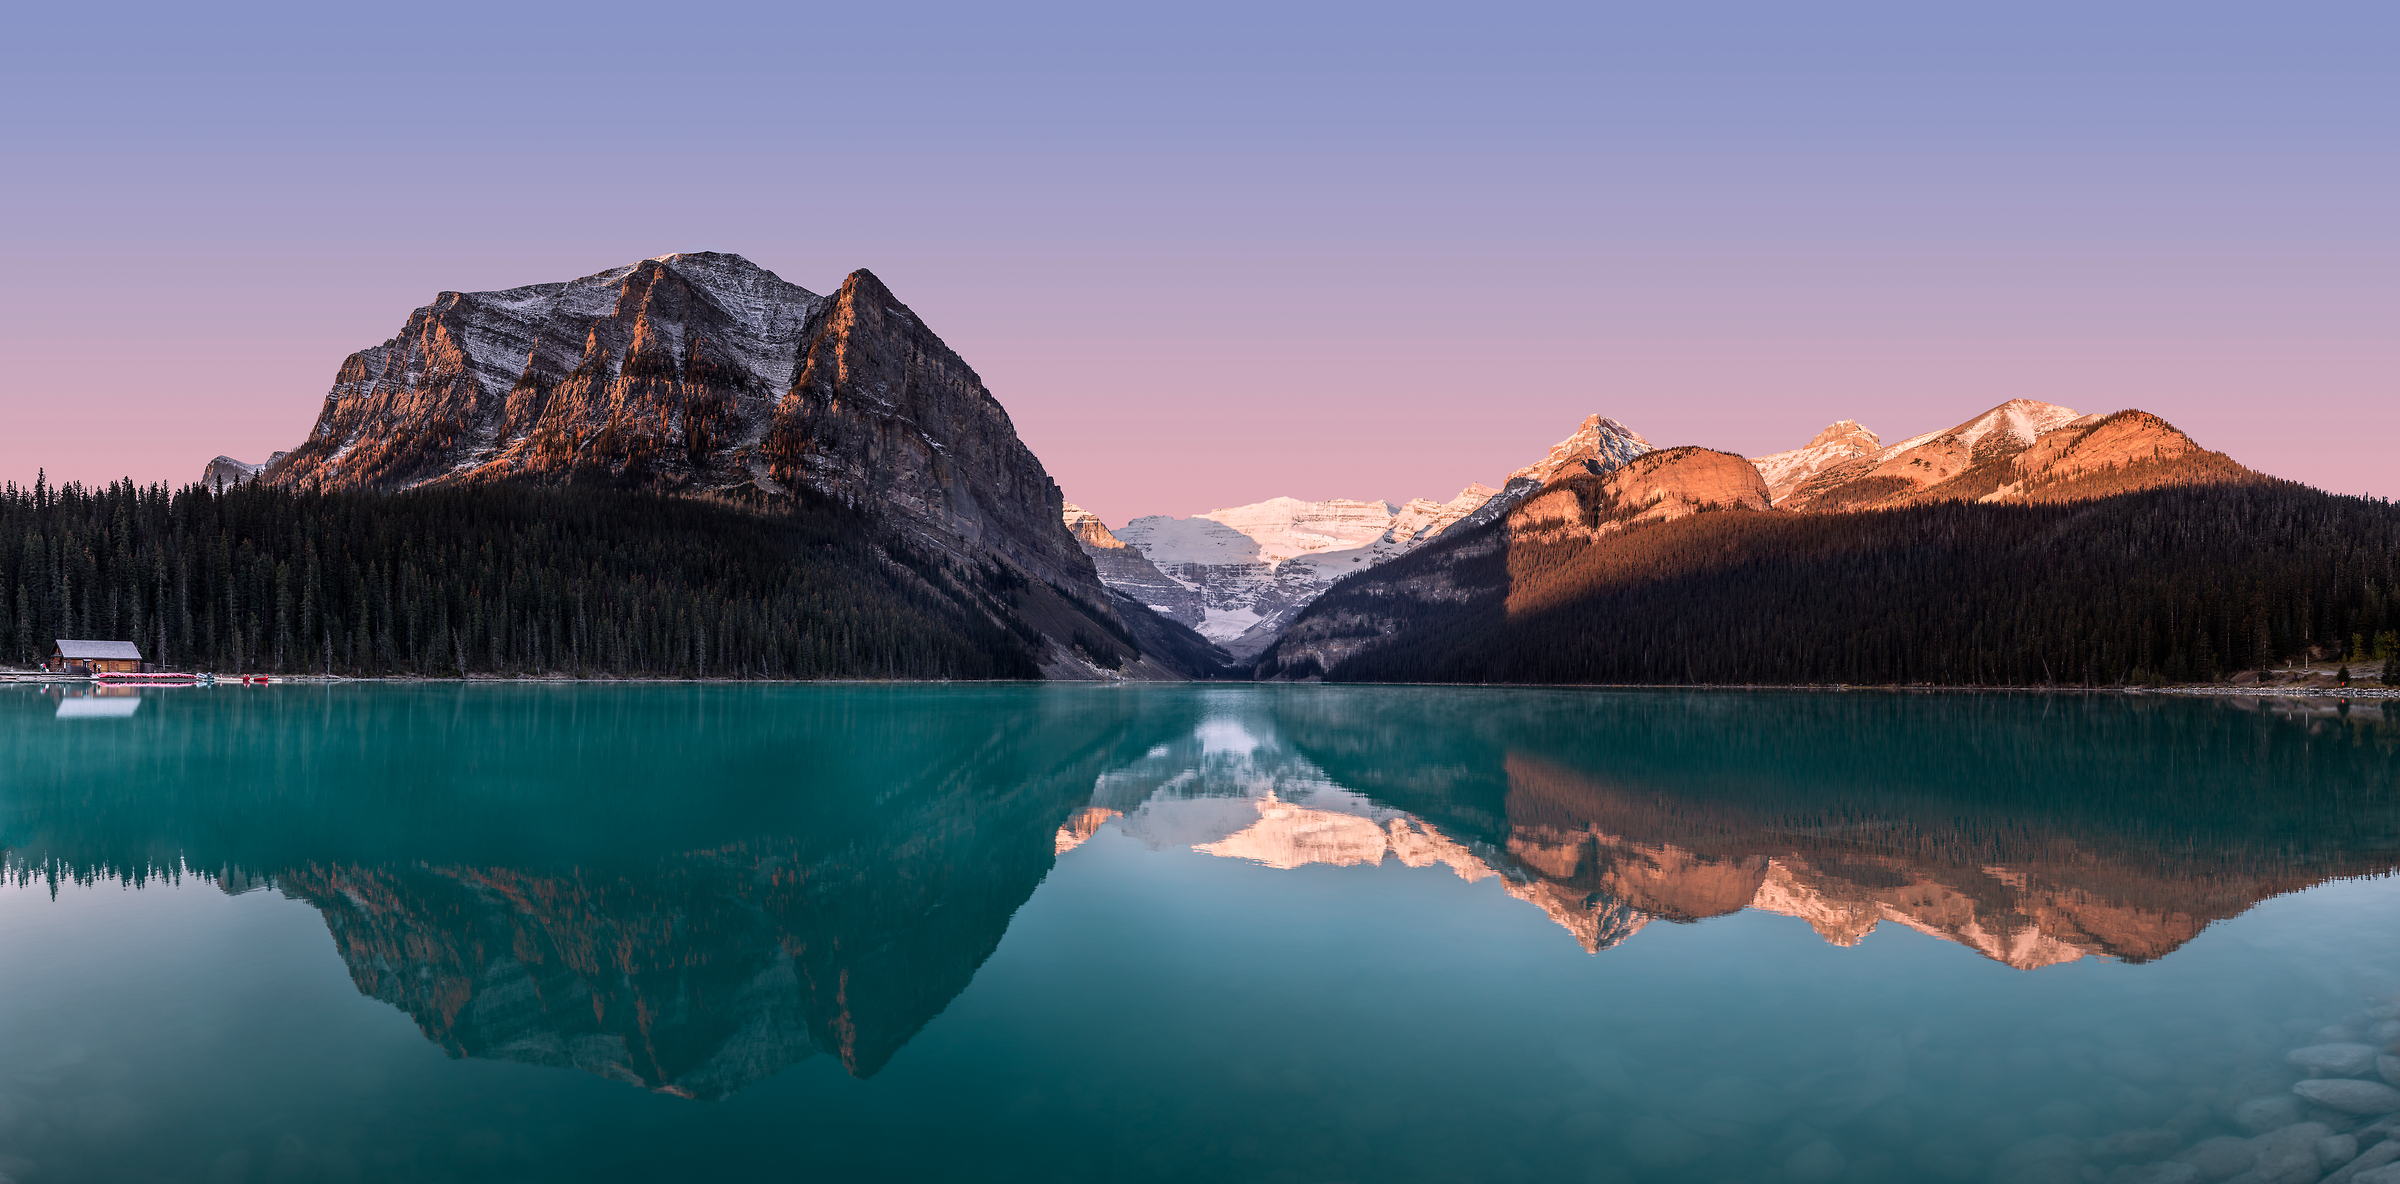 509 megapixels! A very high resolution, large-format VAST photo print of mountains and lakes, and Lake Louise; fine art landscape photo created by Chris Collacott in Banff National Park, Alberta, Canada.